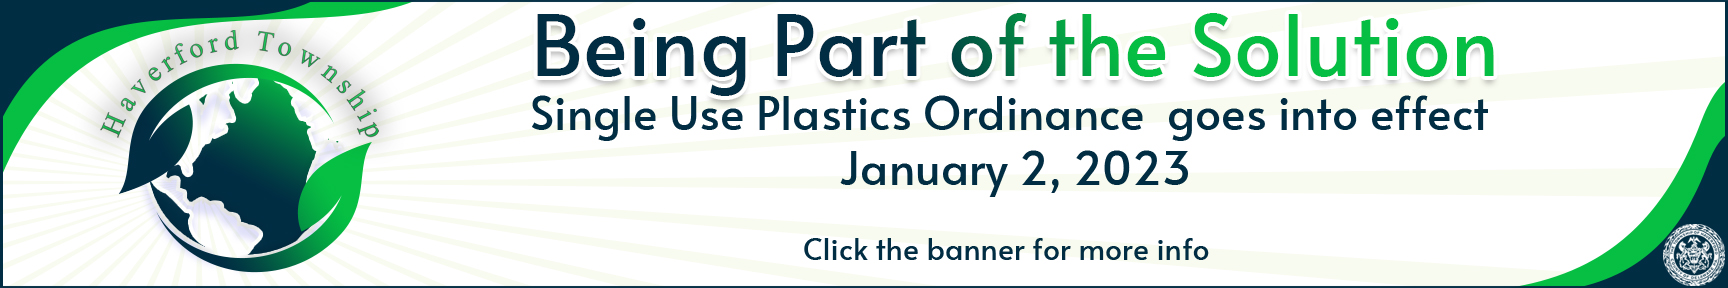 Plastic Free in Haverford Township by 2023